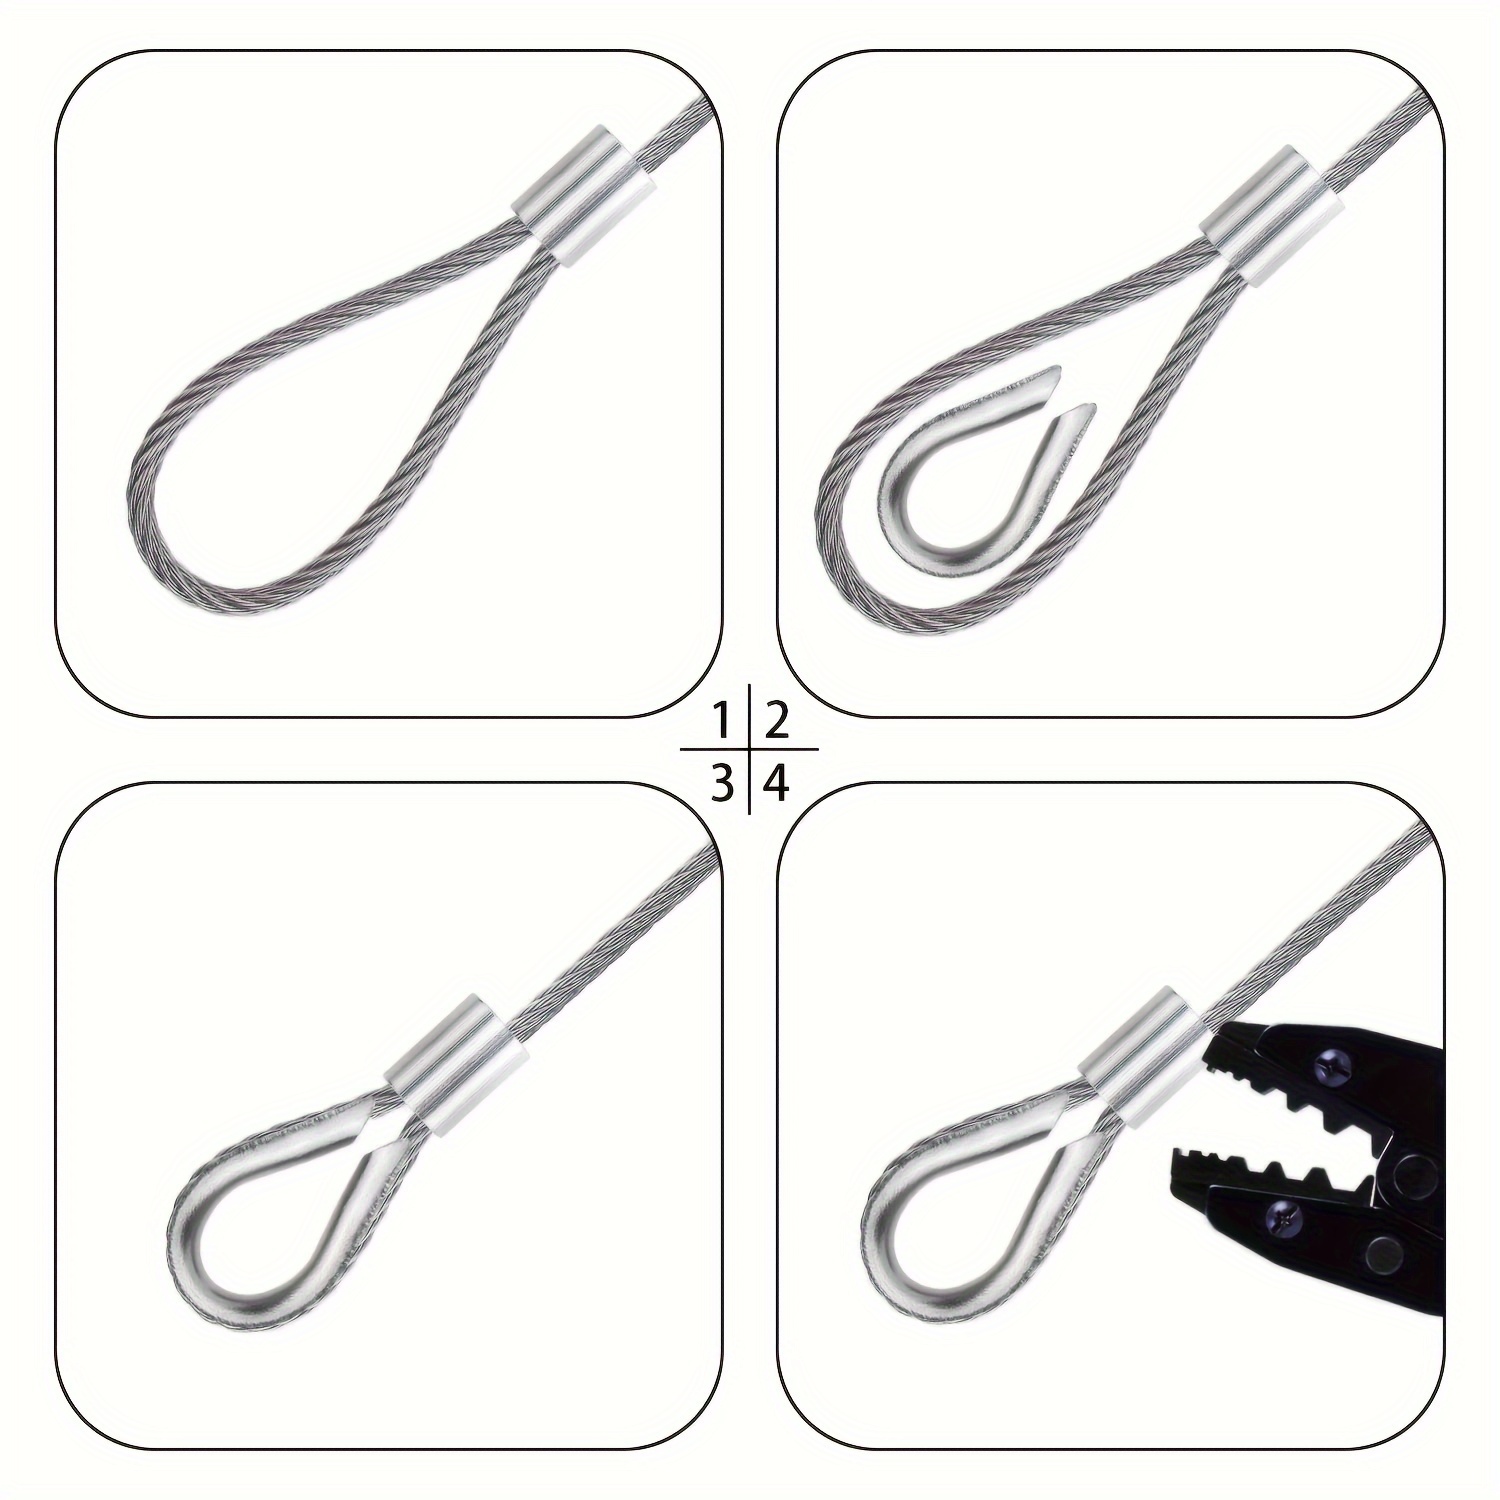 M6, 10pcs 304 stainless steel swivel snap , high quality wire rope